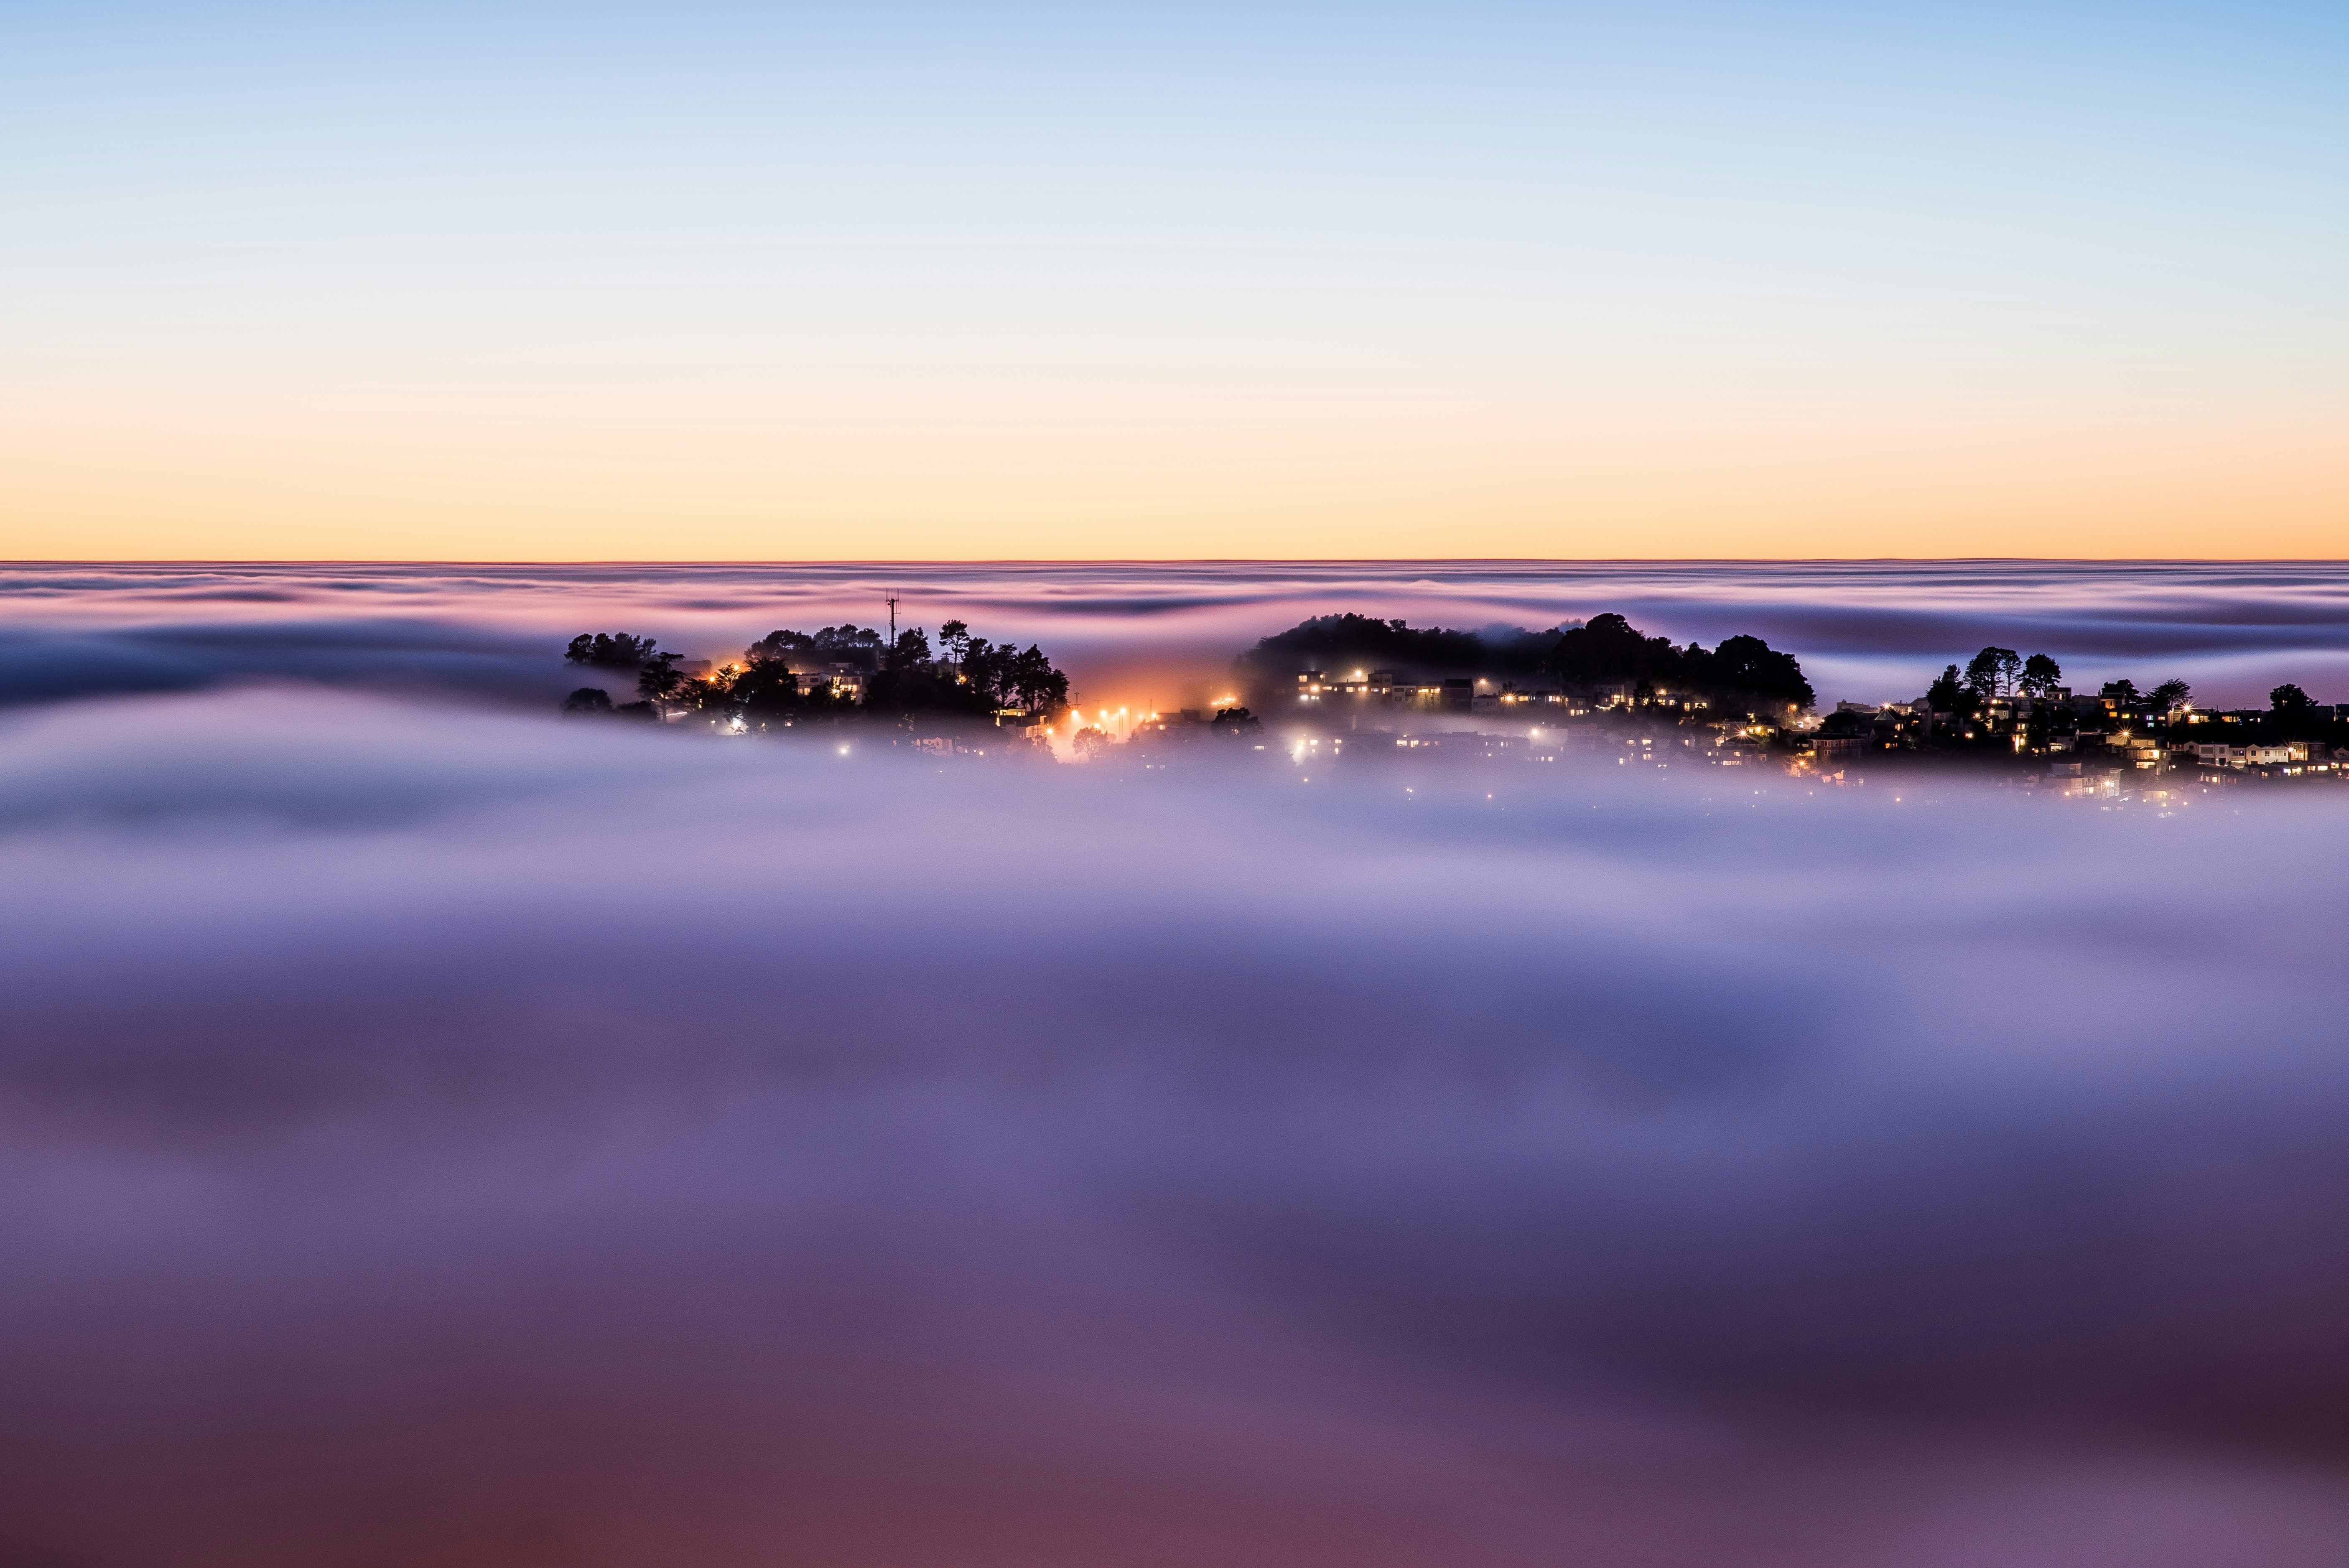 An image of a thick mist, through which a town seems to be peeking. Photo by John Chavez.